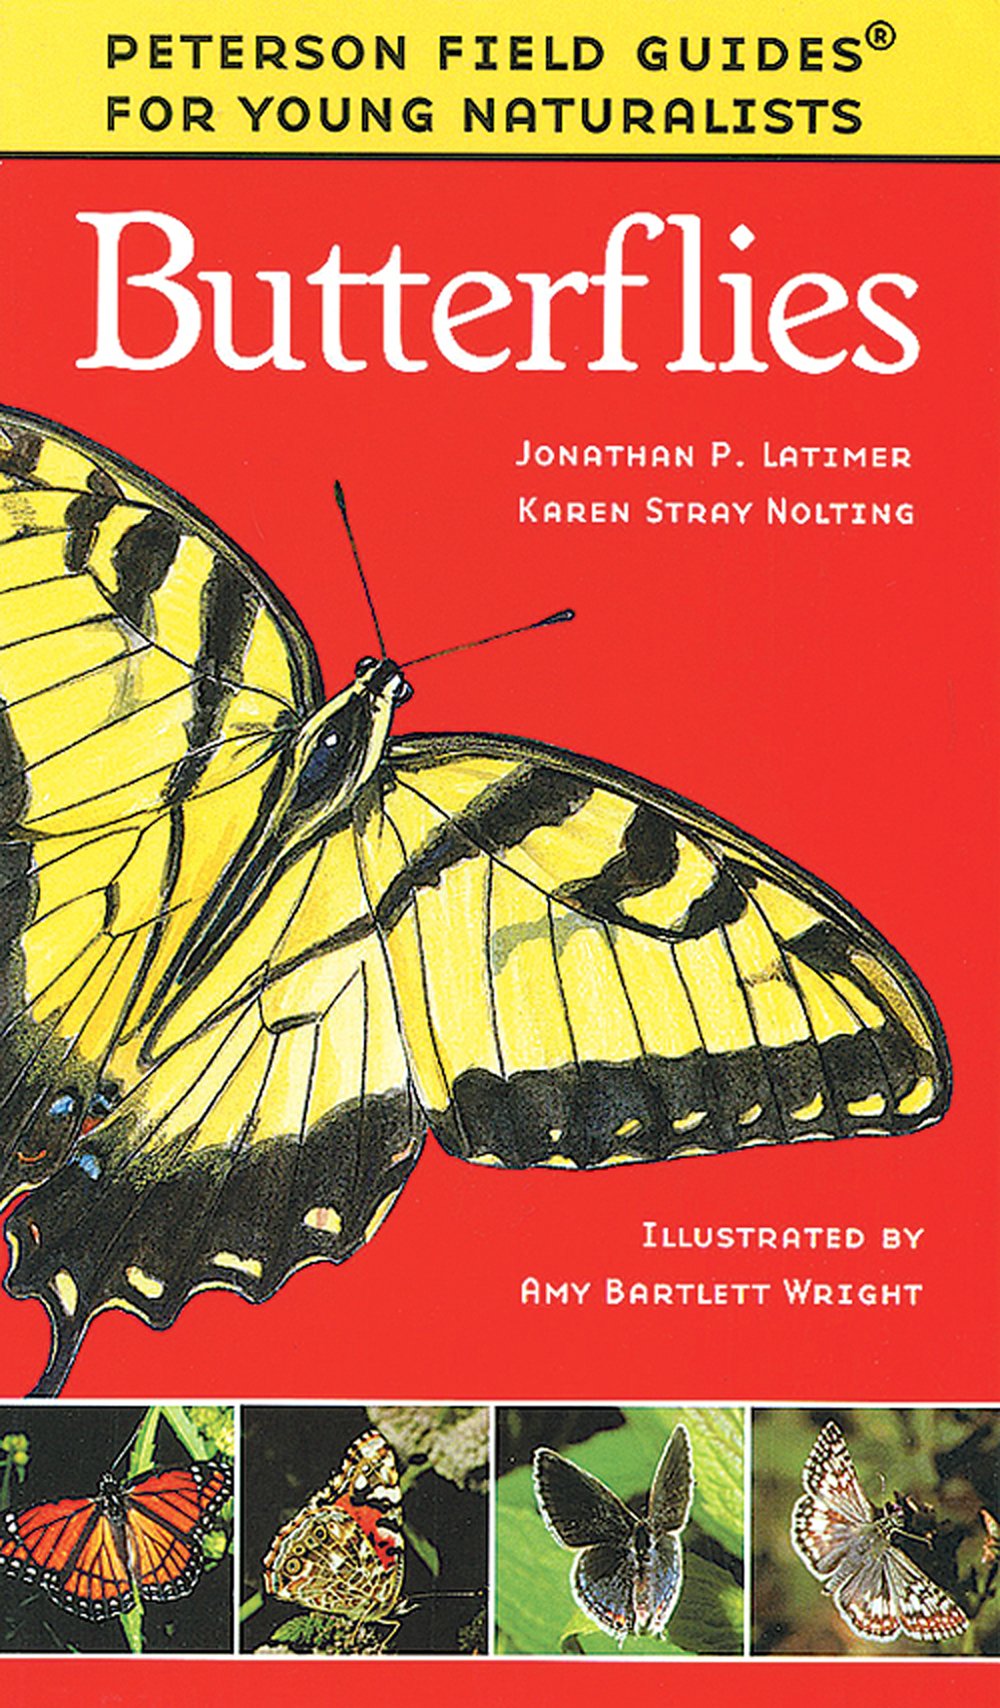 Butterflies (Peterson Field Guide for Young Naturalists®)